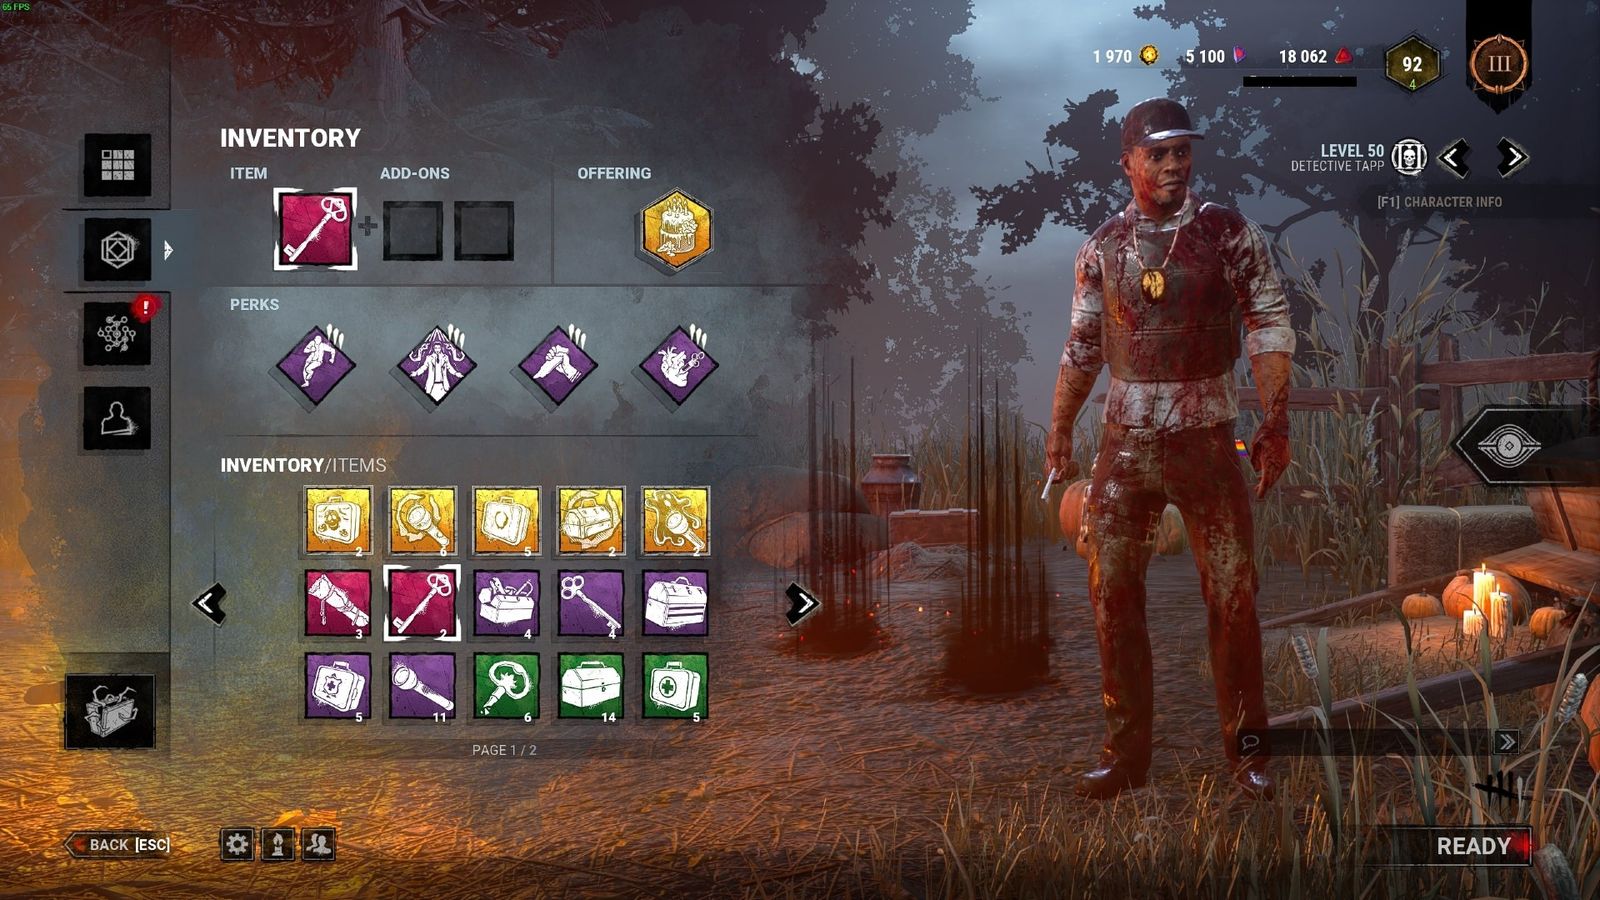 A survivor loadout in Dead by Daylight for avoiding and escaping the hook.